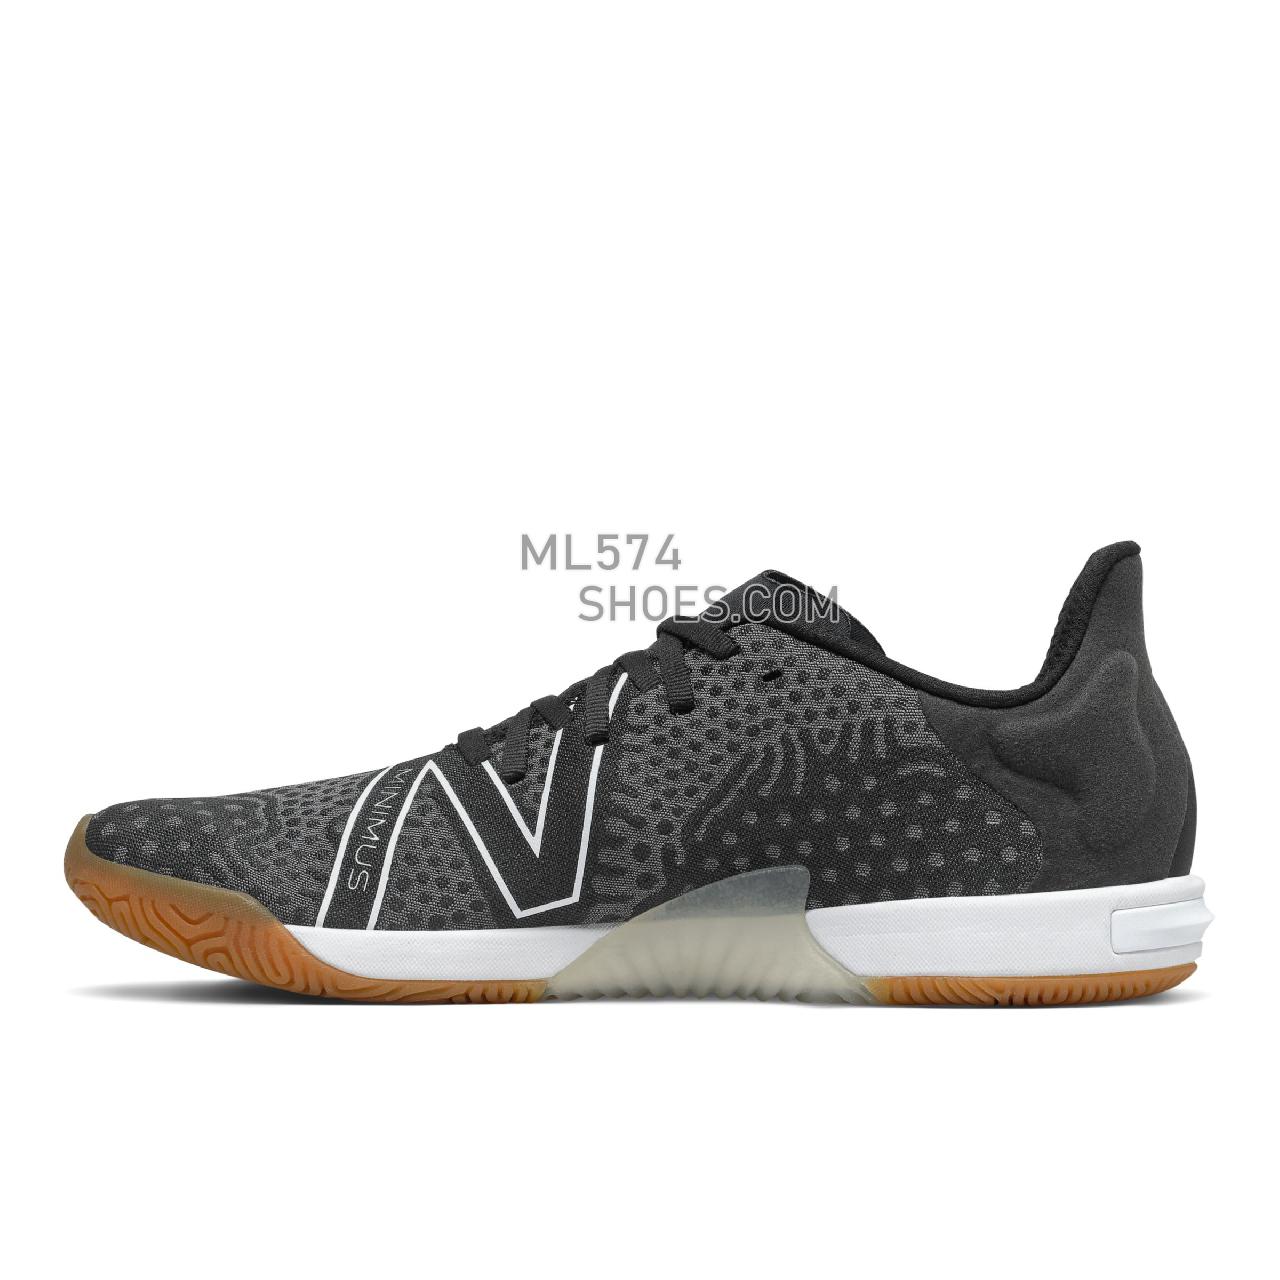 New Balance Minimus TR - Men's Cross-Training - Black with Outerspace and White - MXMTRLK1